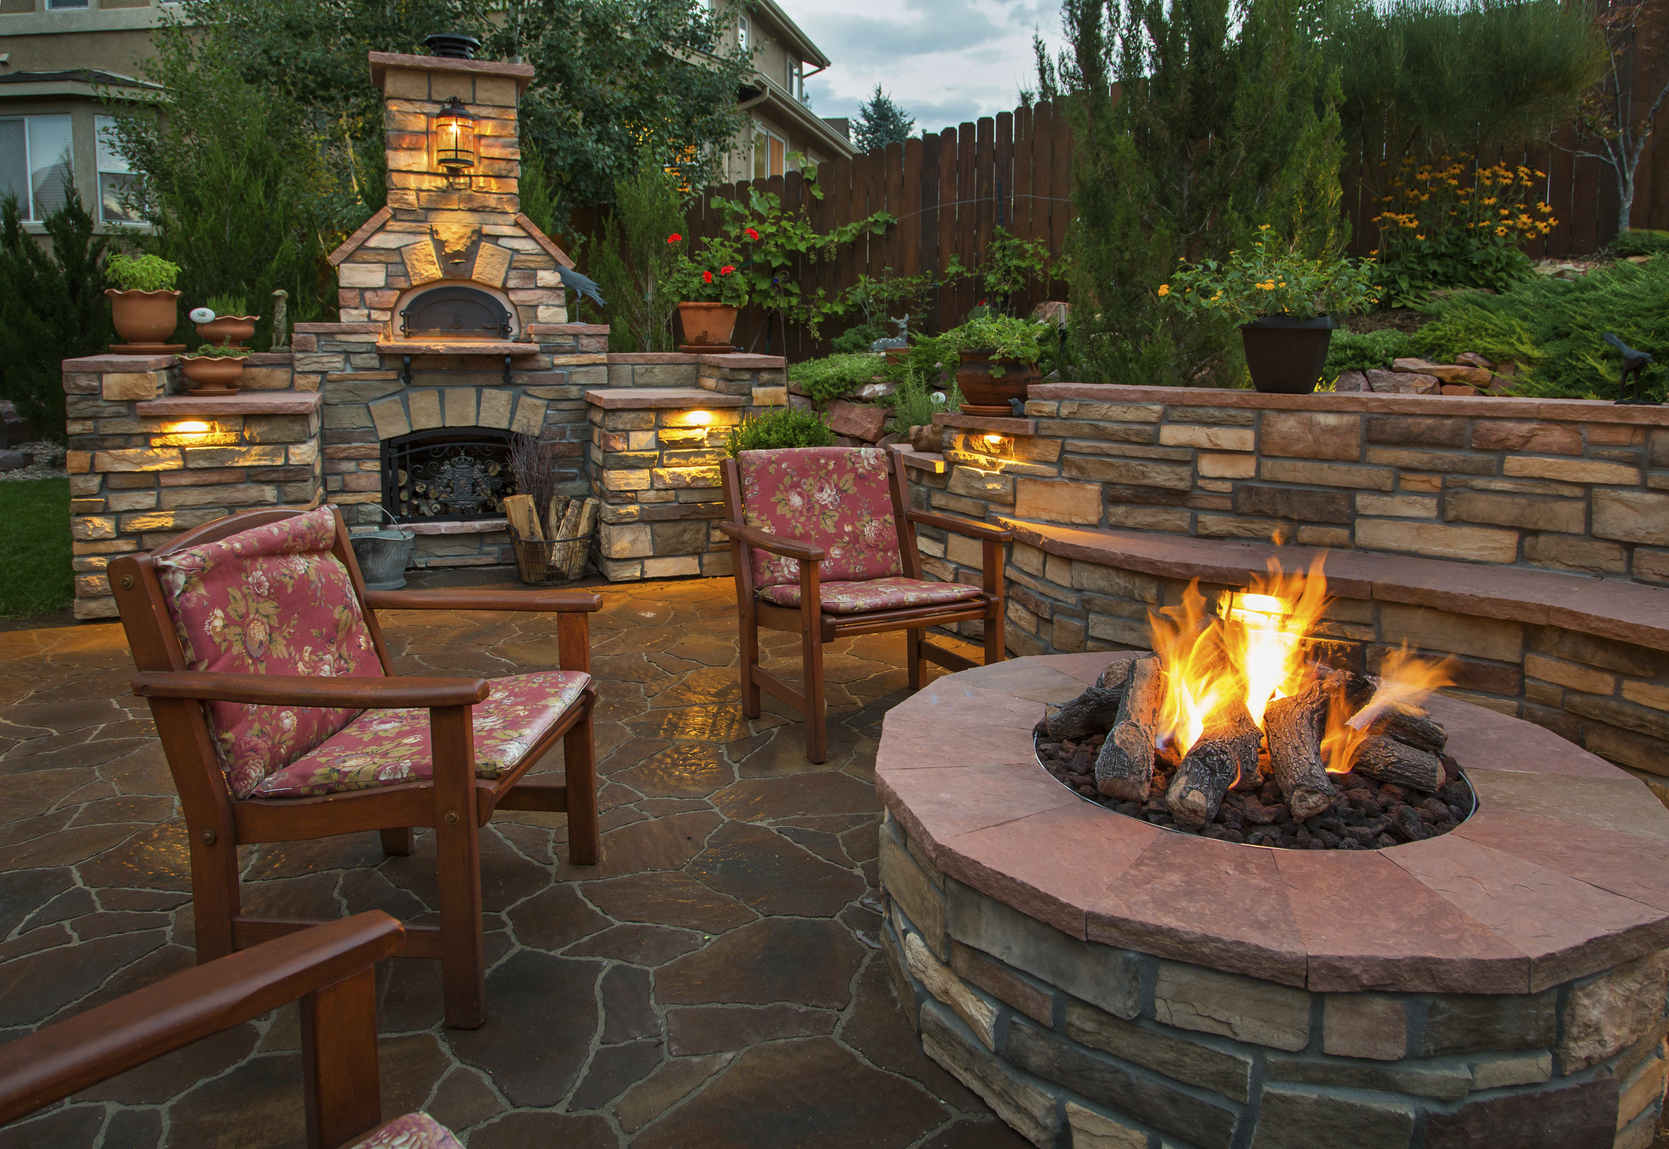 5 Fun Facts About Fire Pits